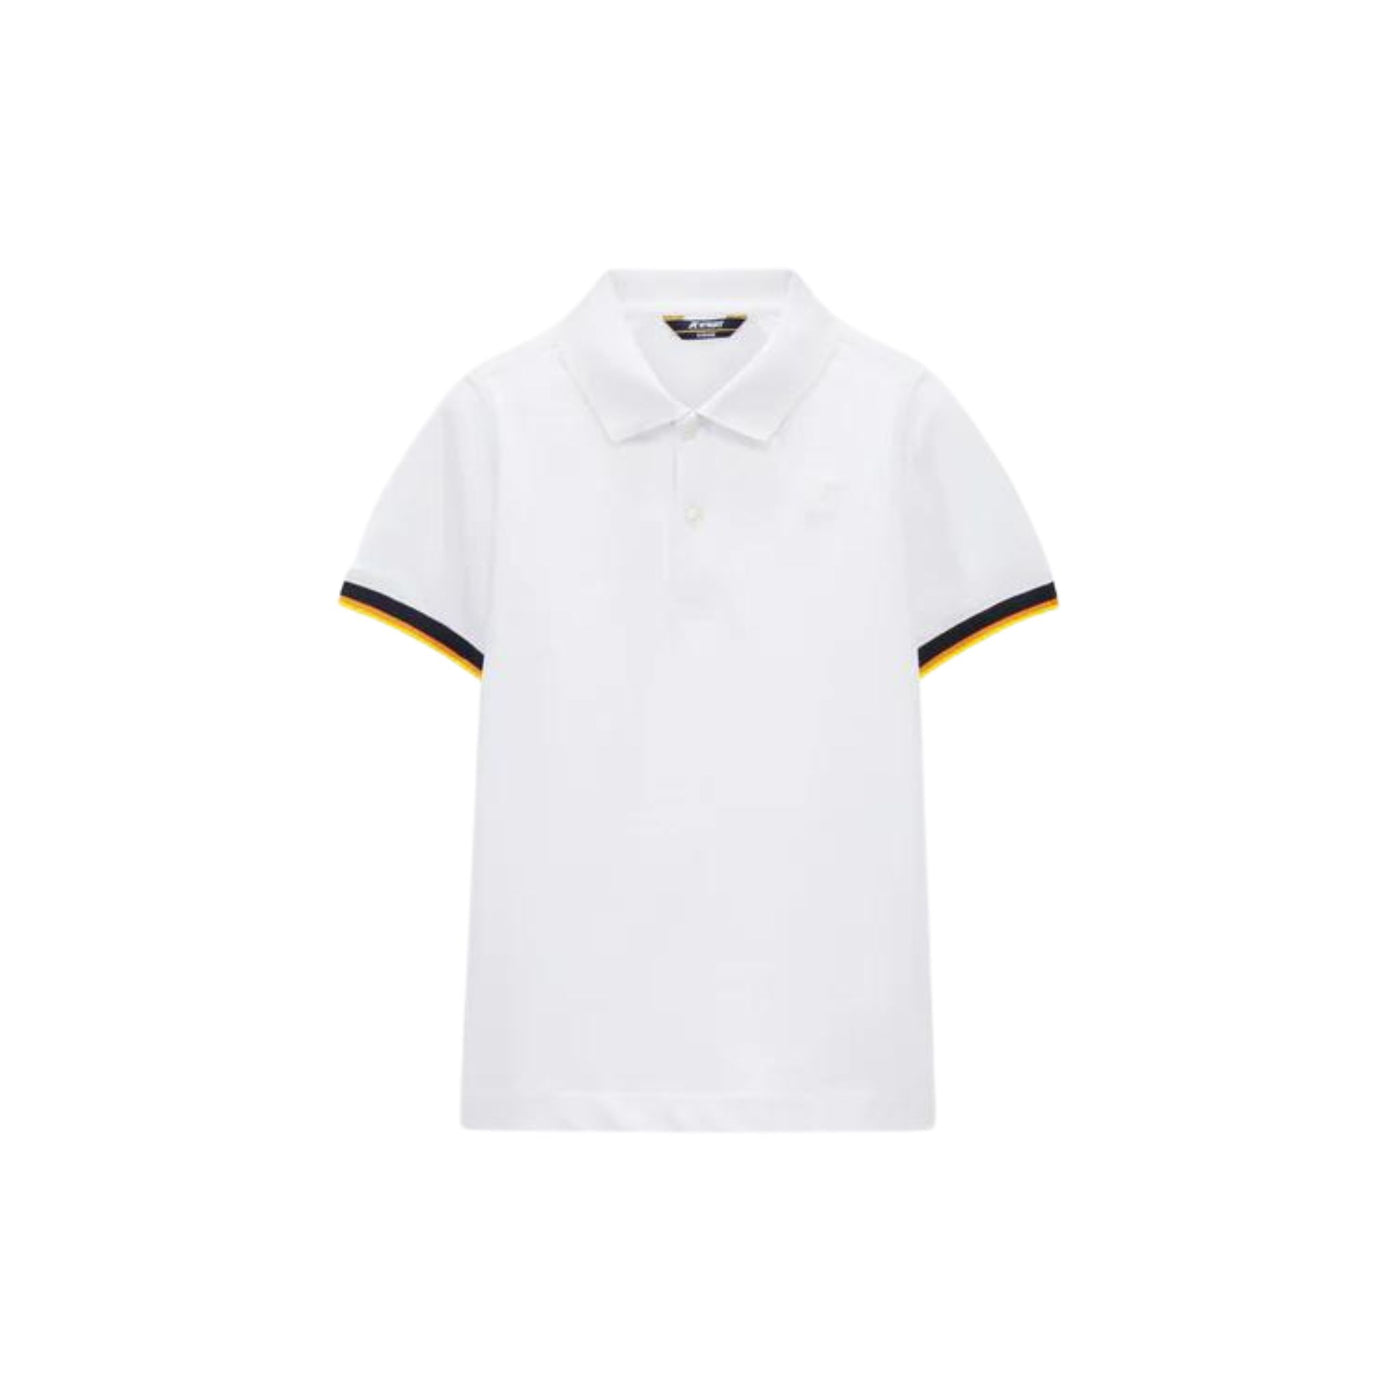 Children's Solid Color Polo Shirt